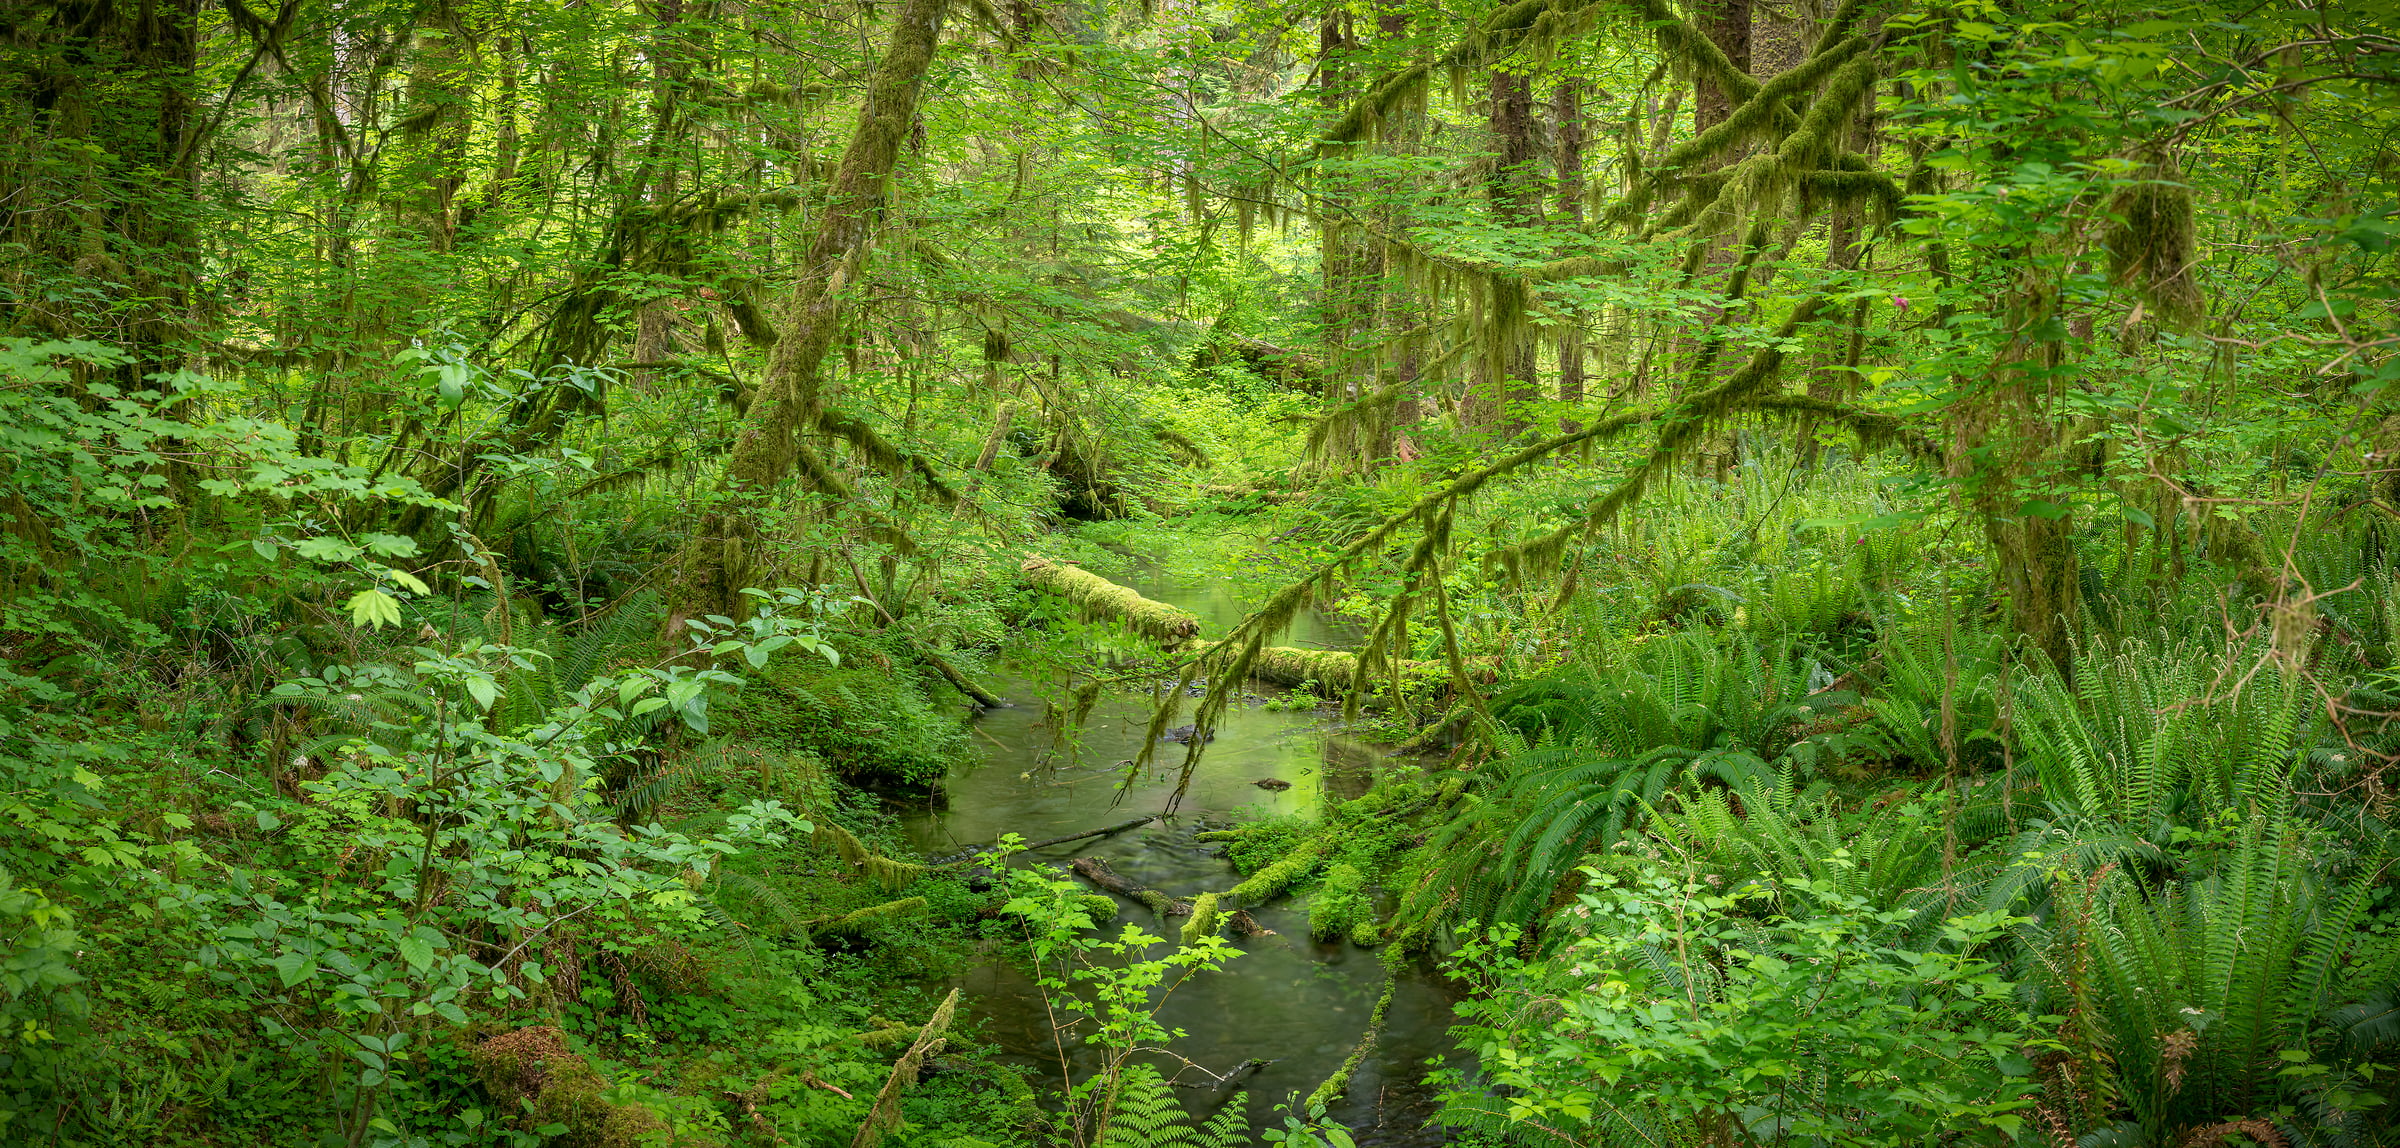 200 megapixels! A very high resolution, large-format VAST photo print of a lush, green rainforest; nature photograph created by Greg Probst in Hoh Rainforest, Olympic National Park, Washington